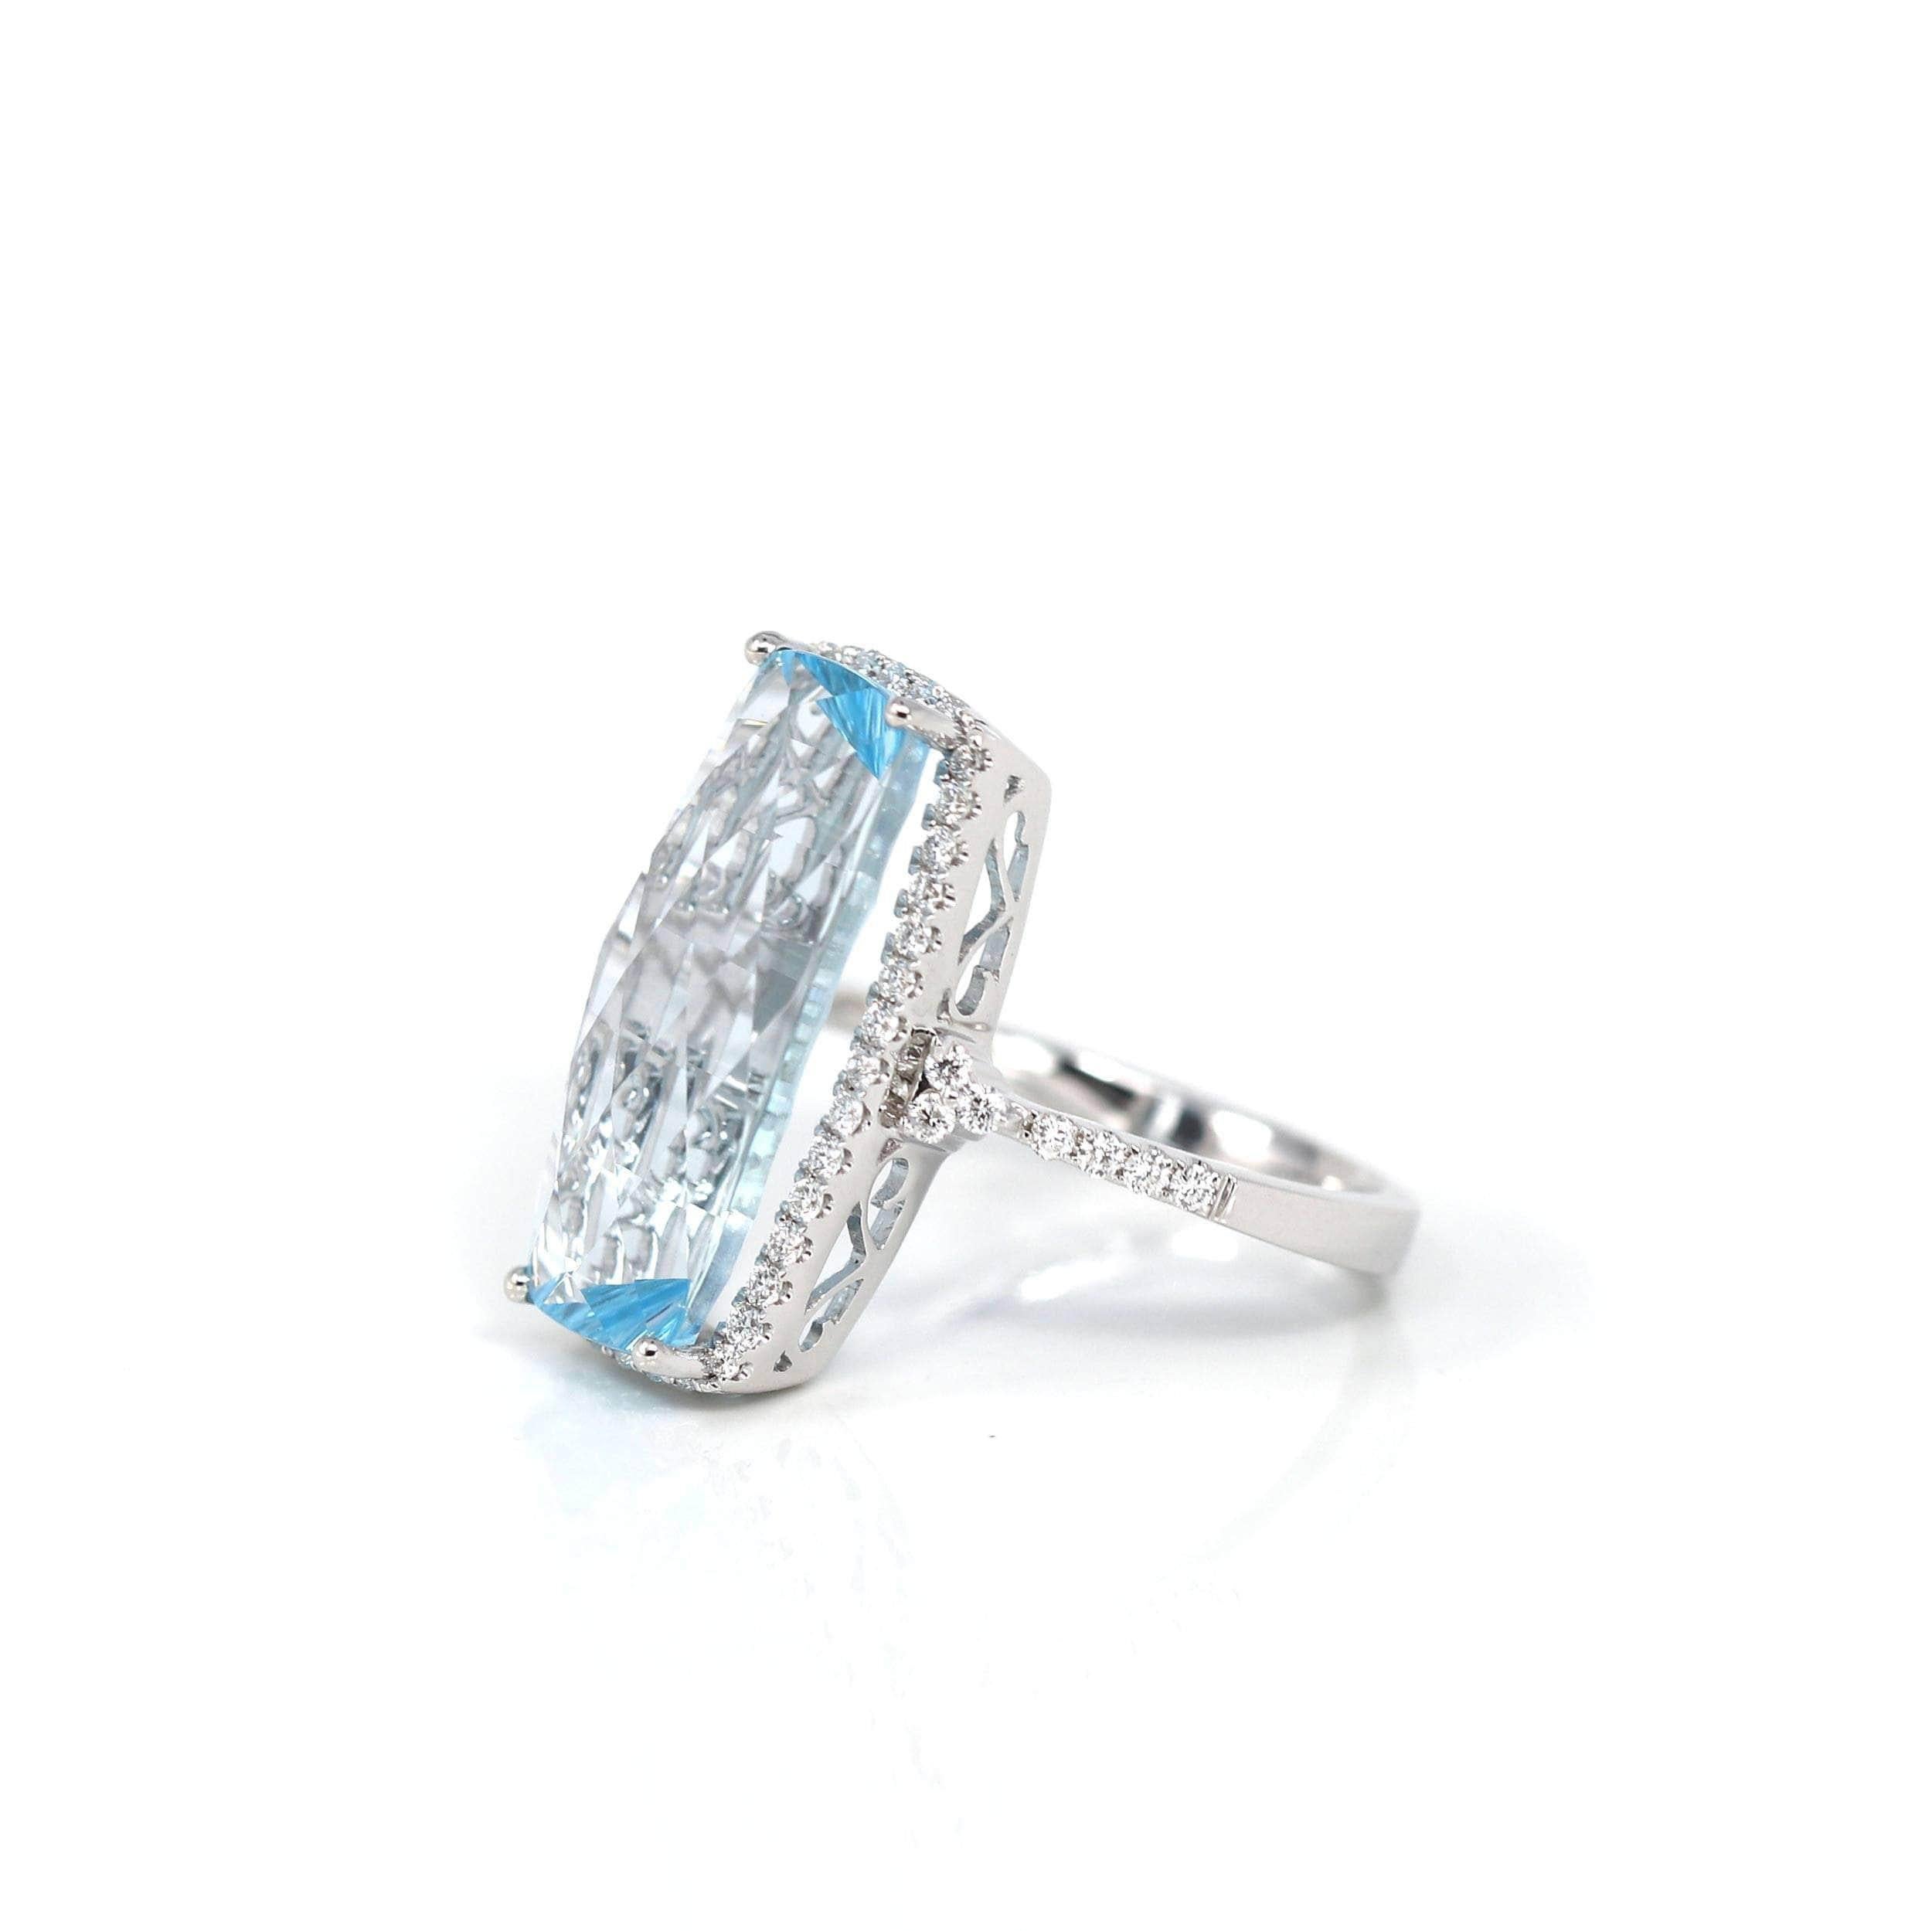 * Design Concept--- This ring features a Brazillian topaz 9.5 ct genuine swiss blue fancy cut topaz. The design is simplistic yet elegant. The ring looks very exquisite with some diamond halo. Baikalla artisans are dedicated to combining beautiful